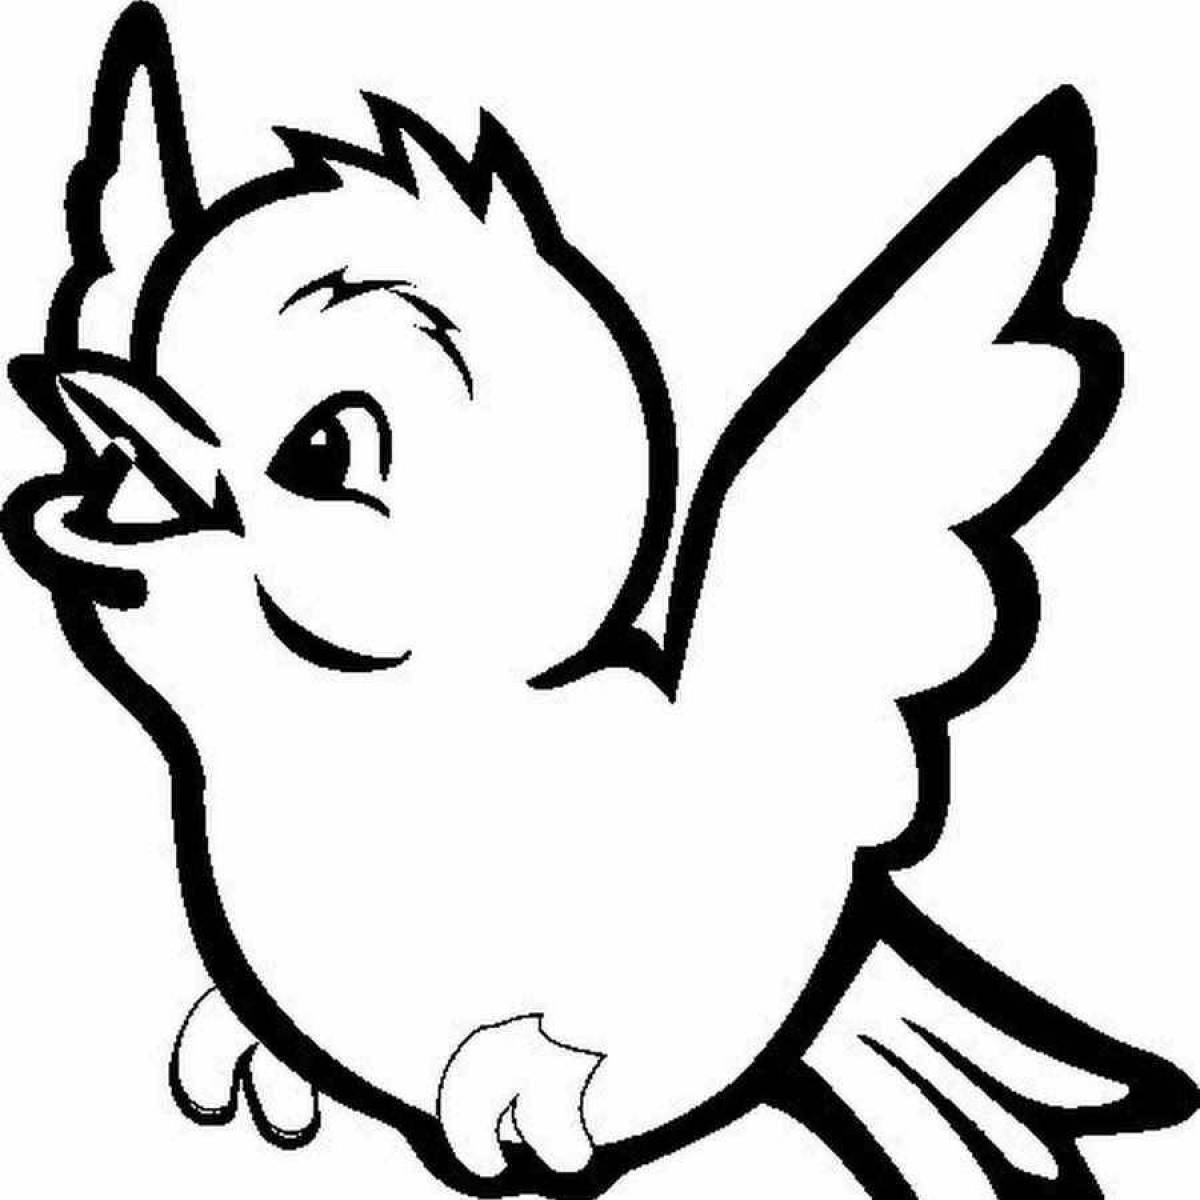 Colorful sparrow coloring page for kids